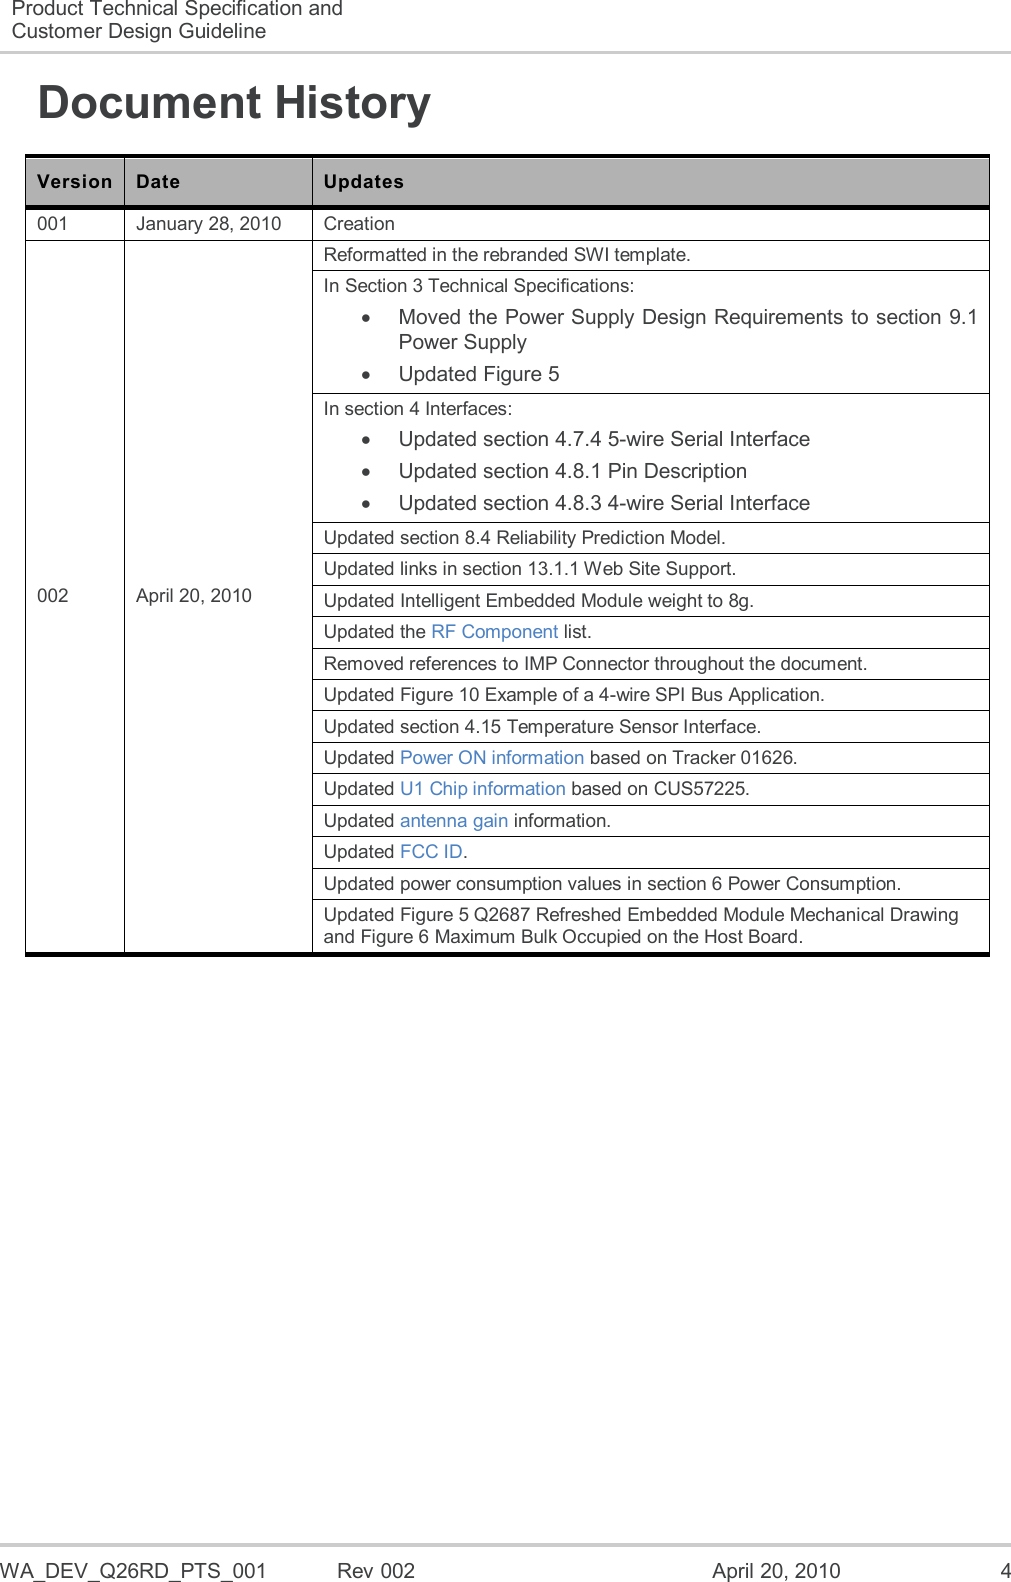  WA_DEV_Q26RD_PTS_001  Rev 002  April 20, 2010  4 Product Technical Specification and Customer Design Guideline  Document History Version Date Updates 001 January 28, 2010 Creation 002 April 20, 2010 Reformatted in the rebranded SWI template. In Section 3 Technical Specifications:   Moved the Power Supply Design Requirements to section 9.1 Power Supply   Updated Figure 5 In section 4 Interfaces:   Updated section 4.7.4 5-wire Serial Interface   Updated section 4.8.1 Pin Description   Updated section 4.8.3 4-wire Serial Interface Updated section 8.4 Reliability Prediction Model. Updated links in section 13.1.1 Web Site Support. Updated Intelligent Embedded Module weight to 8g. Updated the RF Component list. Removed references to IMP Connector throughout the document. Updated Figure 10 Example of a 4-wire SPI Bus Application. Updated section 4.15 Temperature Sensor Interface. Updated Power ON information based on Tracker 01626. Updated U1 Chip information based on CUS57225. Updated antenna gain information. Updated FCC ID. Updated power consumption values in section 6 Power Consumption. Updated Figure 5 Q2687 Refreshed Embedded Module Mechanical Drawing and Figure 6 Maximum Bulk Occupied on the Host Board.  